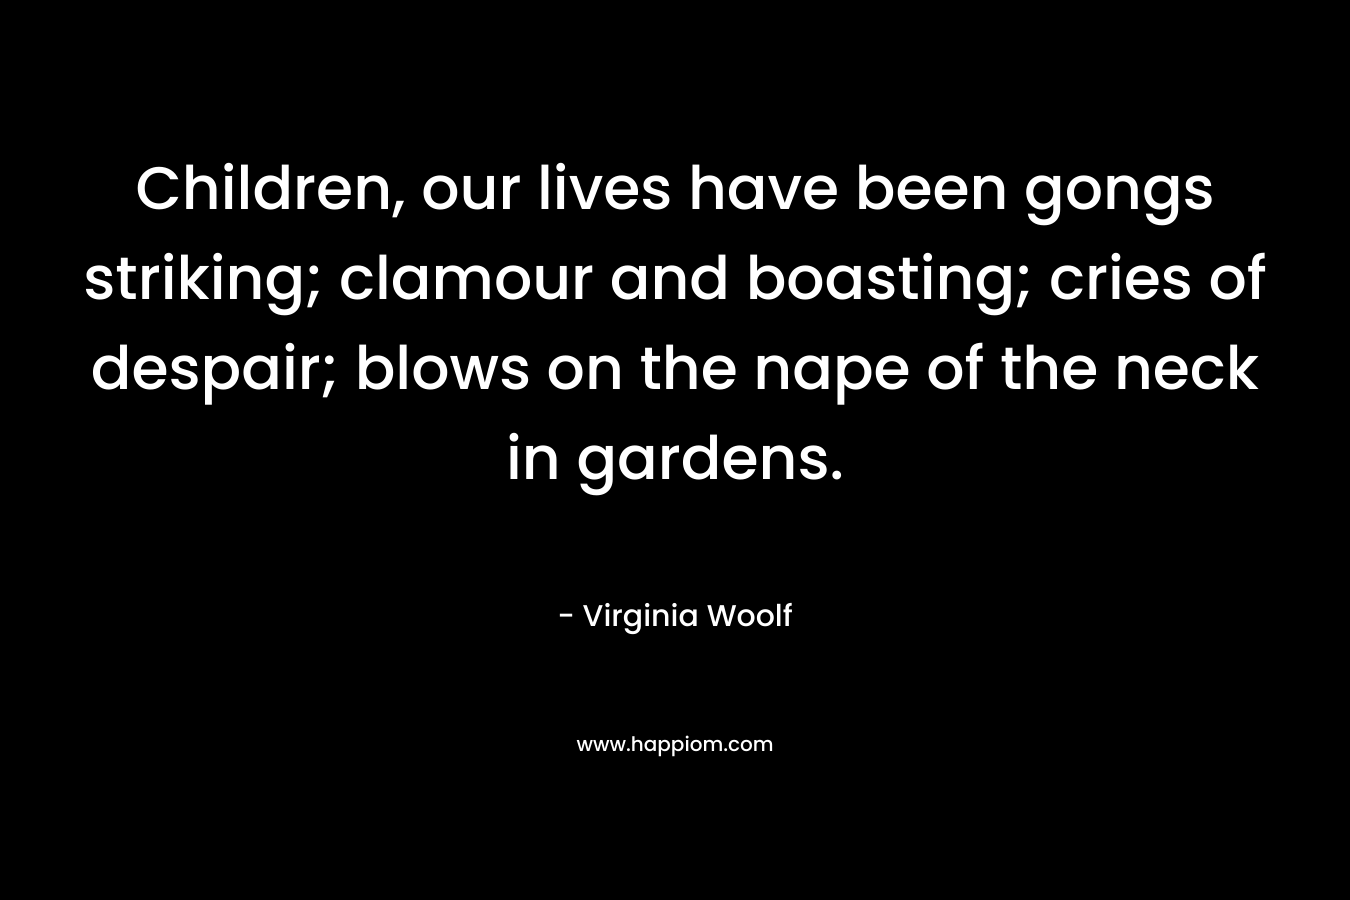 Children, our lives have been gongs striking; clamour and boasting; cries of despair; blows on the nape of the neck in gardens. – Virginia Woolf